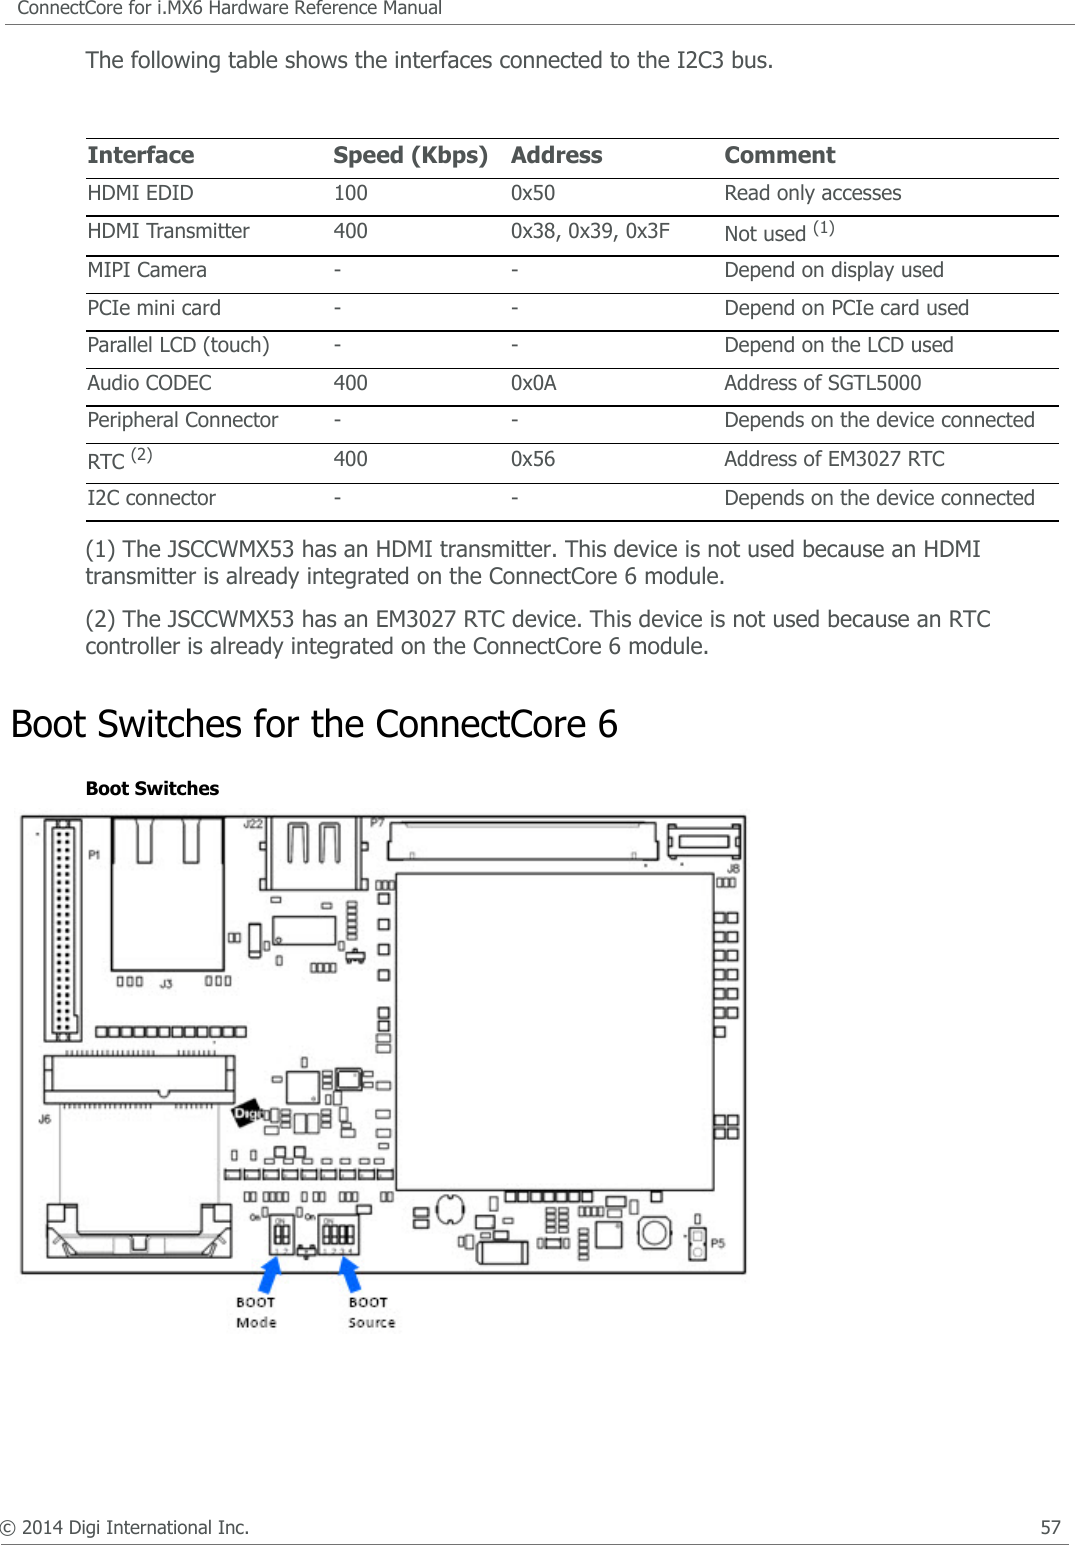 © 2014 Digi International Inc.      55ConnectCore for i.MX6 Hardware Reference ManualBlock DiagramConnectCore 6 GPIO AssignmentsThe table below show the default GPIO assignments done on the ConnectCore 6 module on the adapter board.Signal name GPIO Use on the adapter boardNAND_D0 GPIO2_0 Audio Headphone detectionNAND_D1 GPIO2_1 JSCCWMX53 Touch IRQNAND_D2 GPIO2_2 User LED1NAND_D3 GPIO2_3 User LED2NAND_D4 GPIO2_4 User Key 1NAND_D5 GPIO2_5 User Key 2